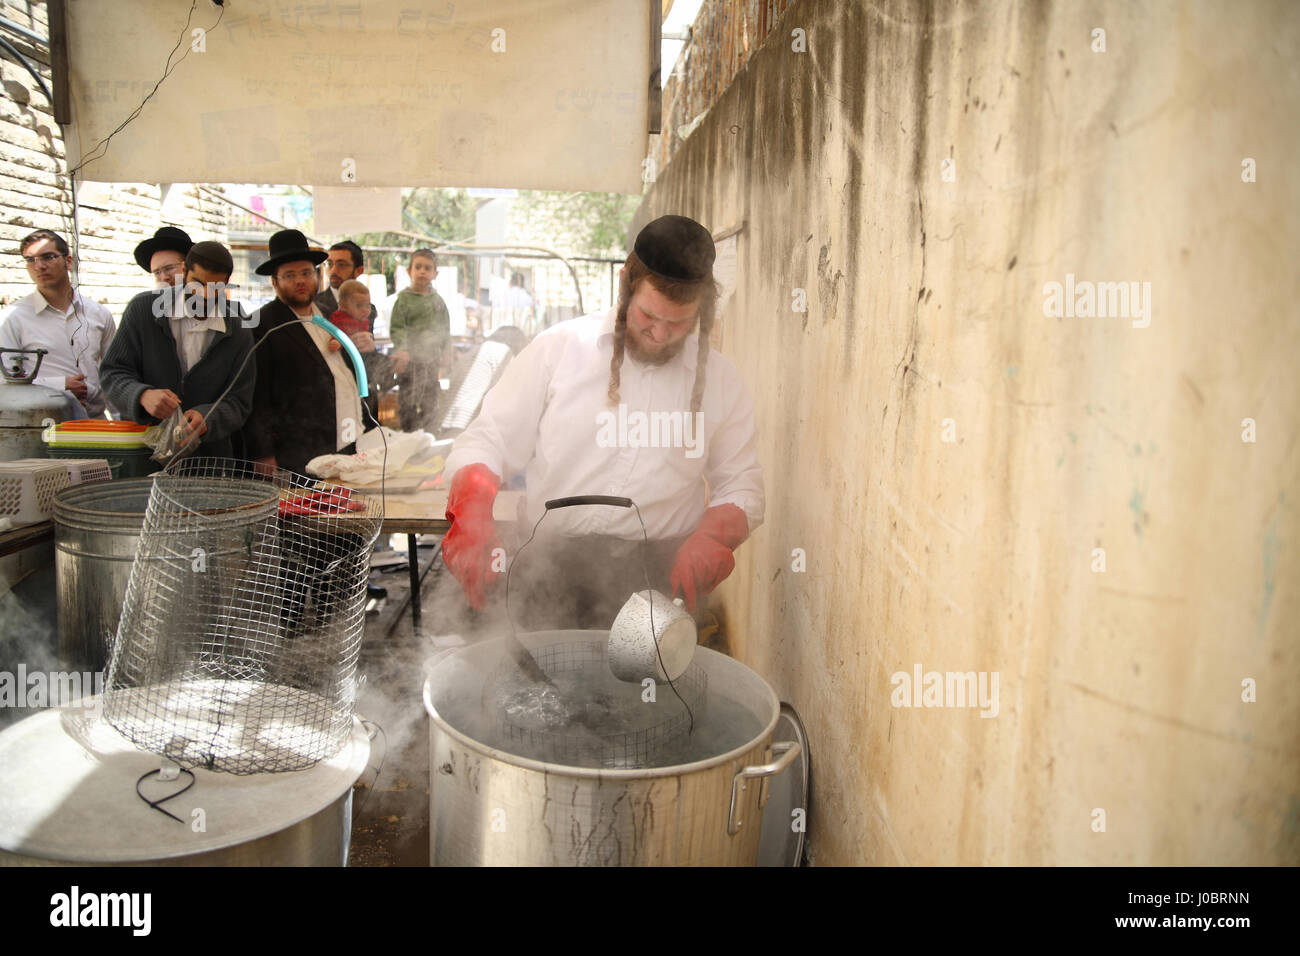 An Orthodox Jewish man gets paid by customers for immersing dishes in boiling water in huge pots to make them Kosher for the upcoming Passover Holiday Stock Photo